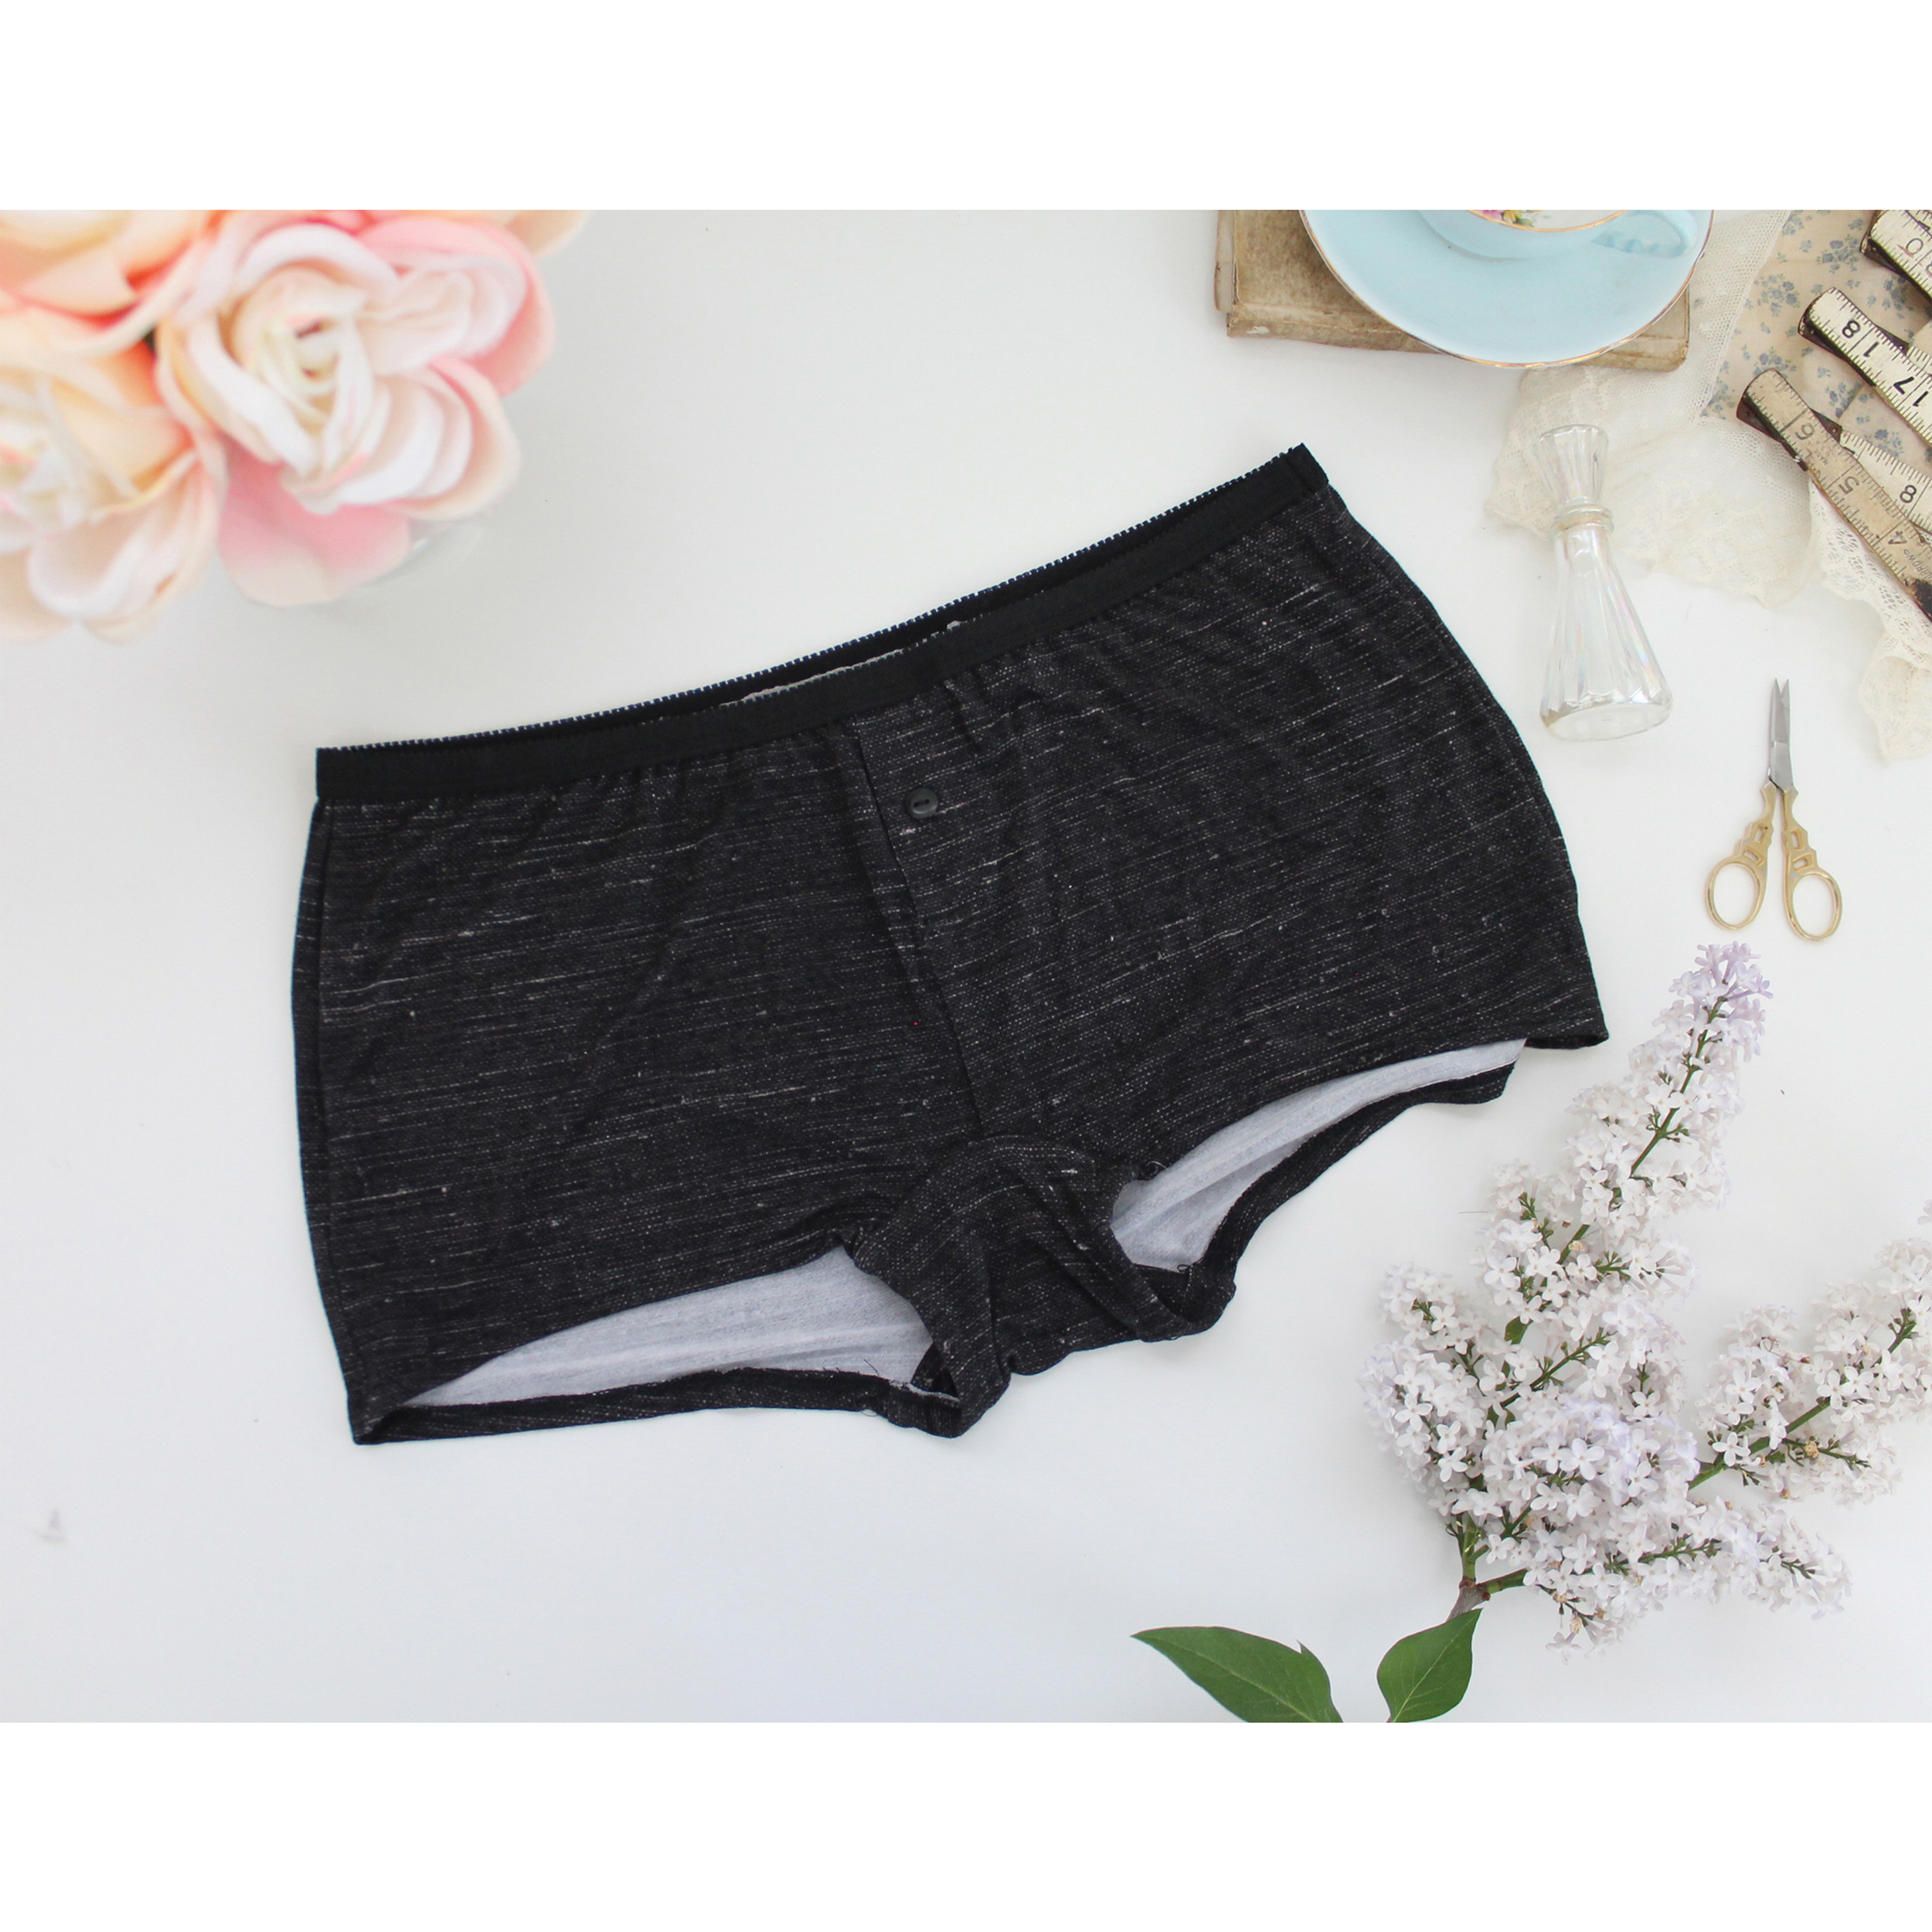 Boyshorts Panties Sewing Pattern PDF Sewing Pattern and Tutorial for Comfortable  Women's Lingerie -  Canada